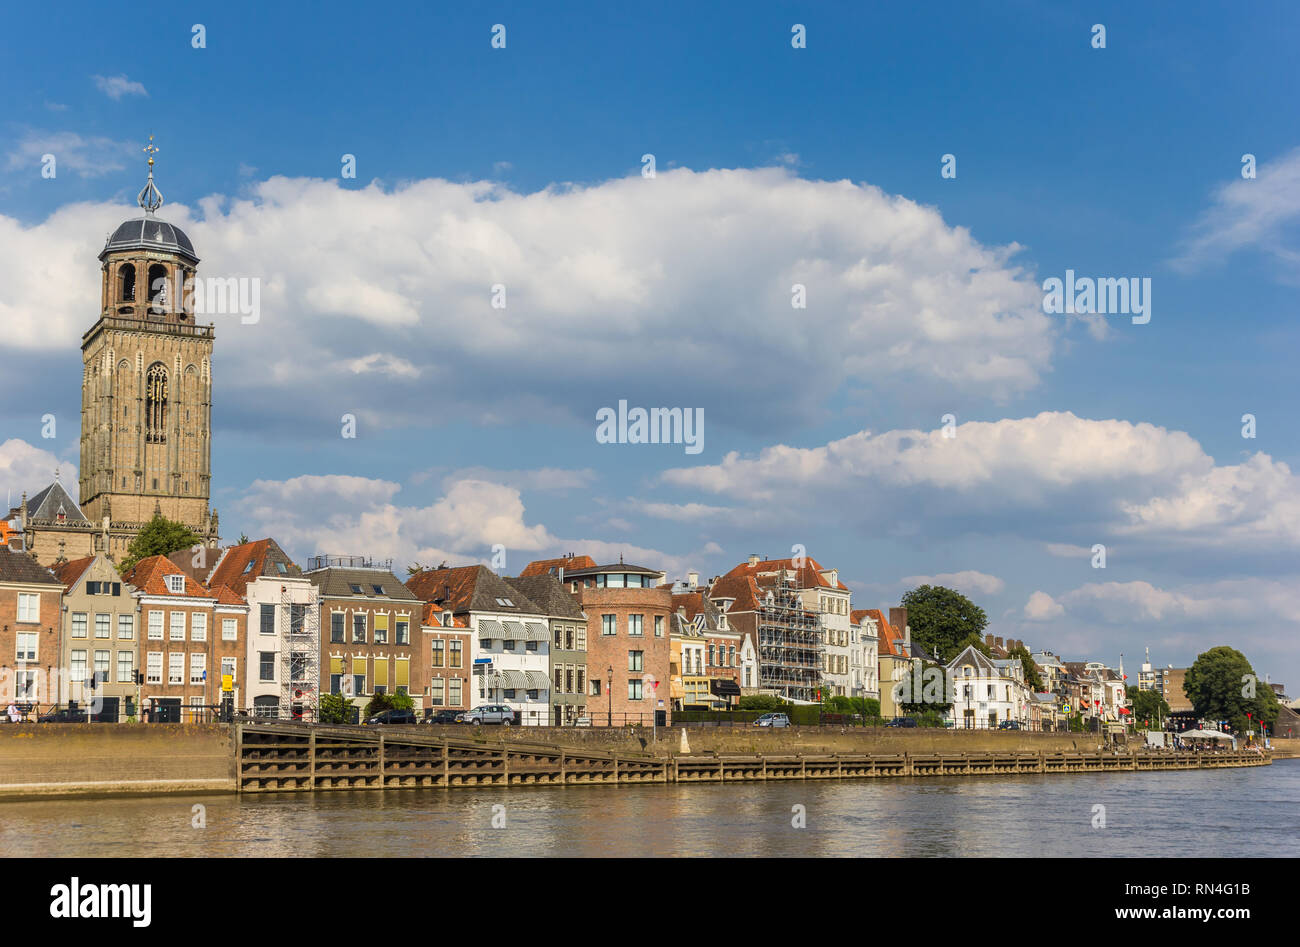 Historic city Deventer at the IJssel river in the Netherlands Stock Photo